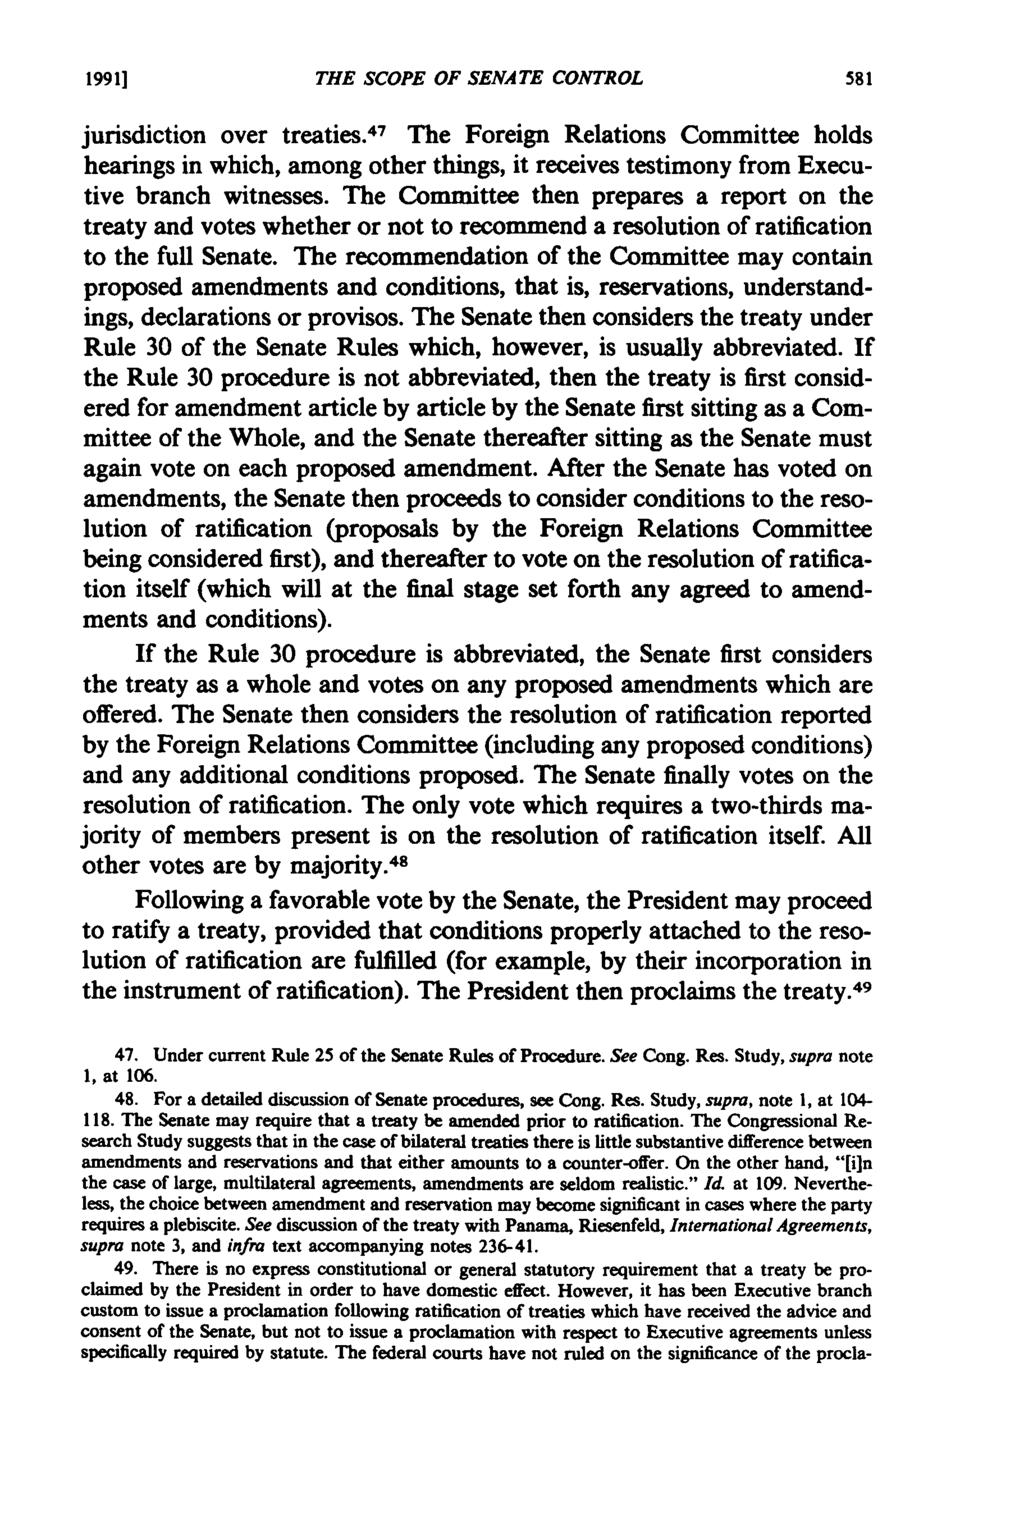 19911 THE SCOPE OF SENATE CONTROL jurisdiction over treaties. 47 The Foreign Relations Committee holds hearings in which, among other things, it receives testimony from Executive branch witnesses.